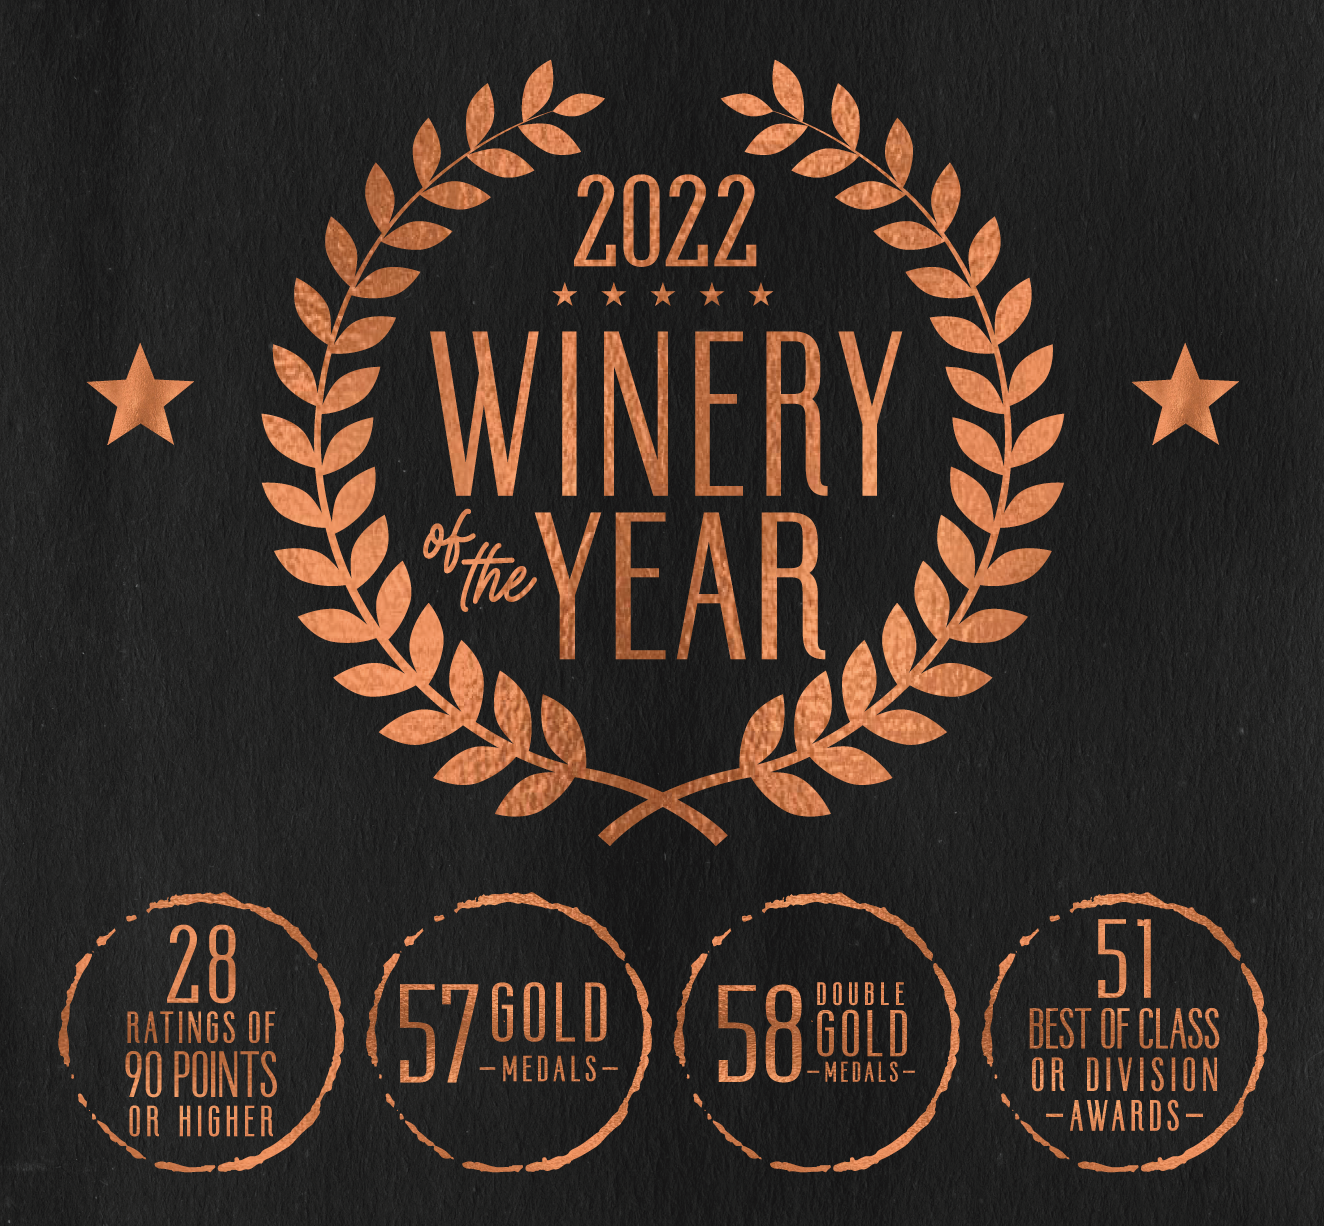 2022 Winery of the Year